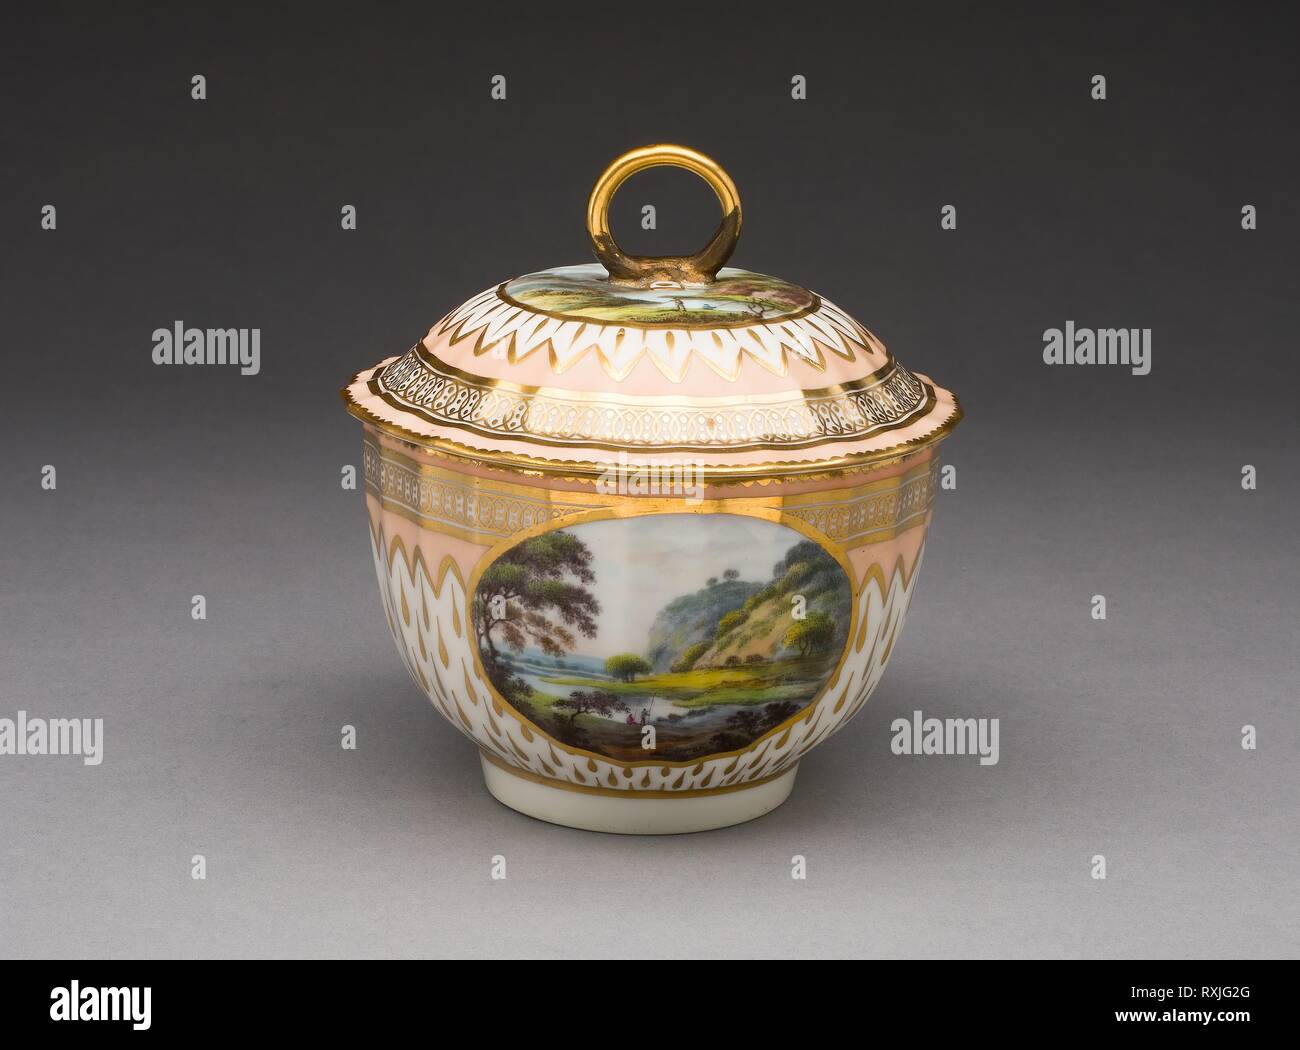 Sugar Bowl. Derby Porcelain Manufactory; England, 1750-1848. Date: 1780-1795. Dimensions: 10.2 × 11.7 cm (4 × 4 5/8 in.). Soft-paste porcelain, polychrome enamels and gilding with brass ring. Origin: Derby. Museum: The Chicago Art Institute. Stock Photo